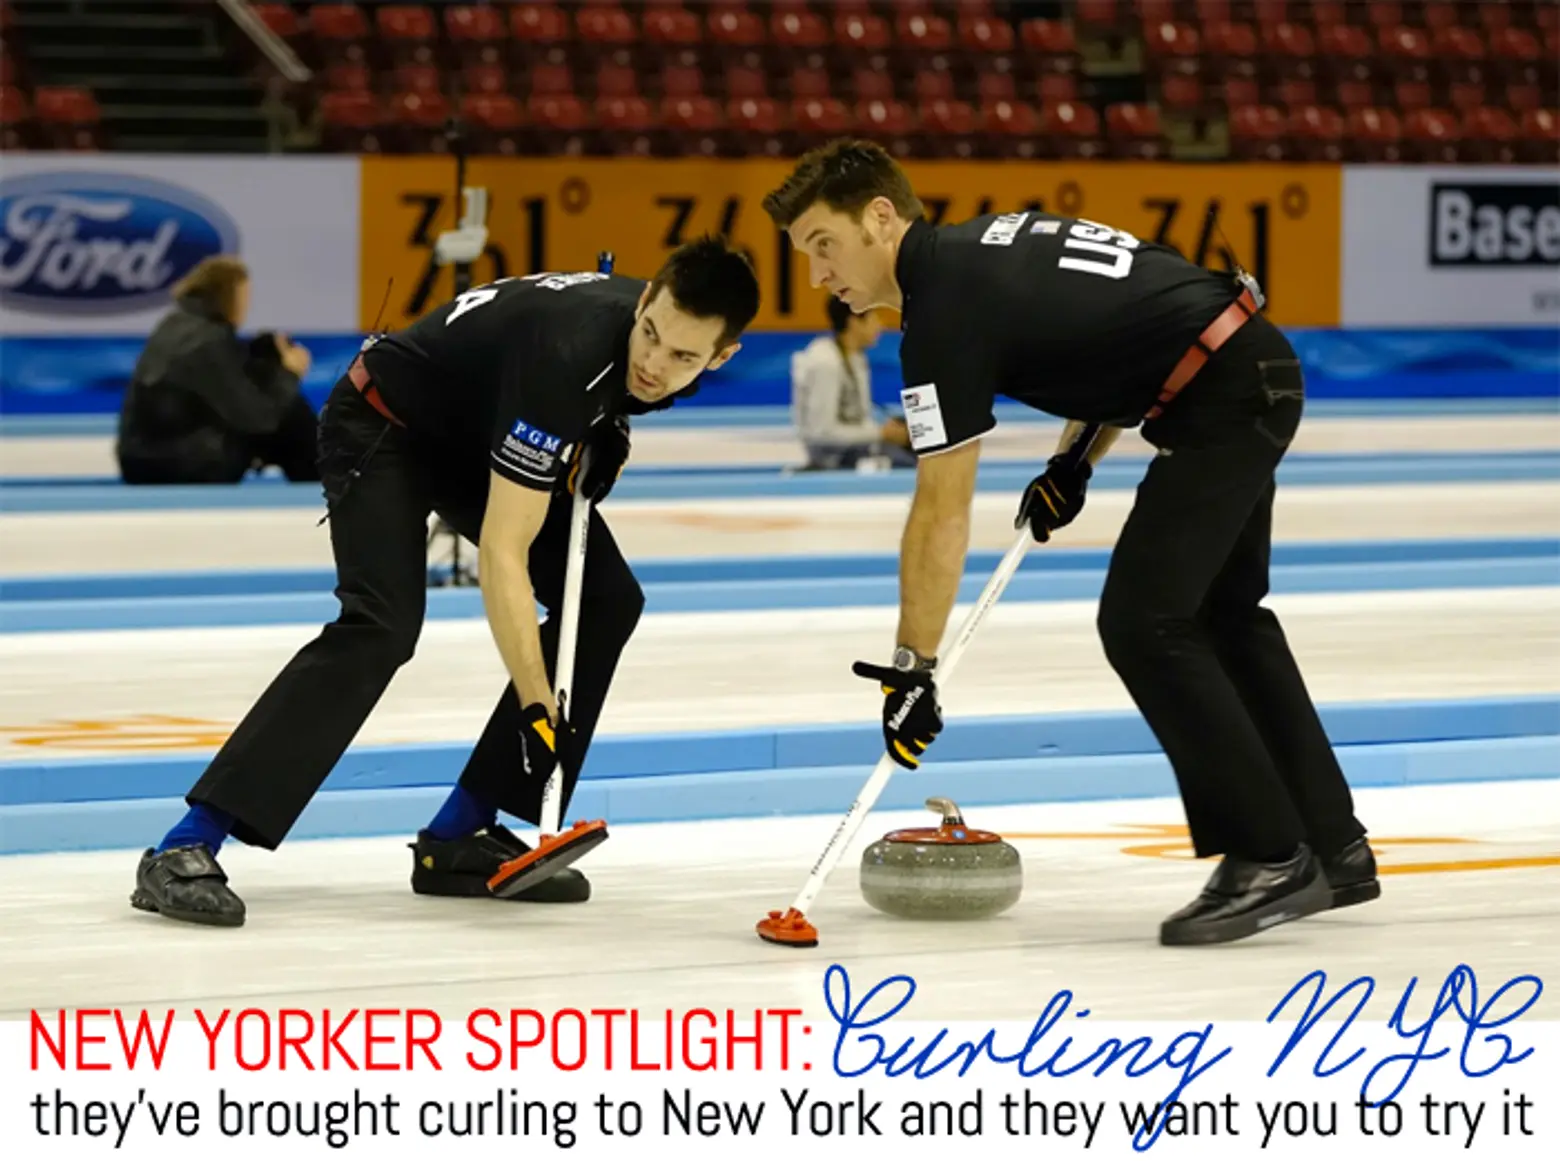 New Yorker Spotlight: CurlNYC Has Brought Curling to New York and They Want You to Try It